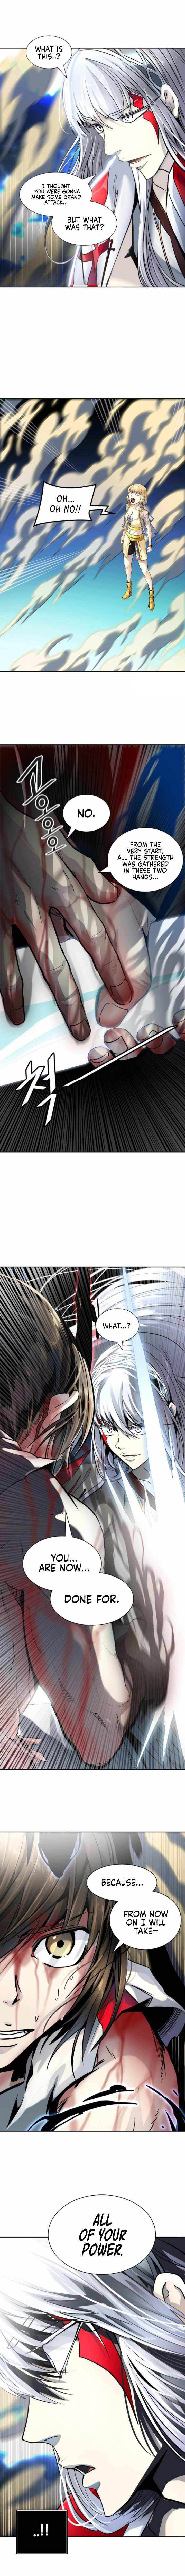 Tower Of God 509 26